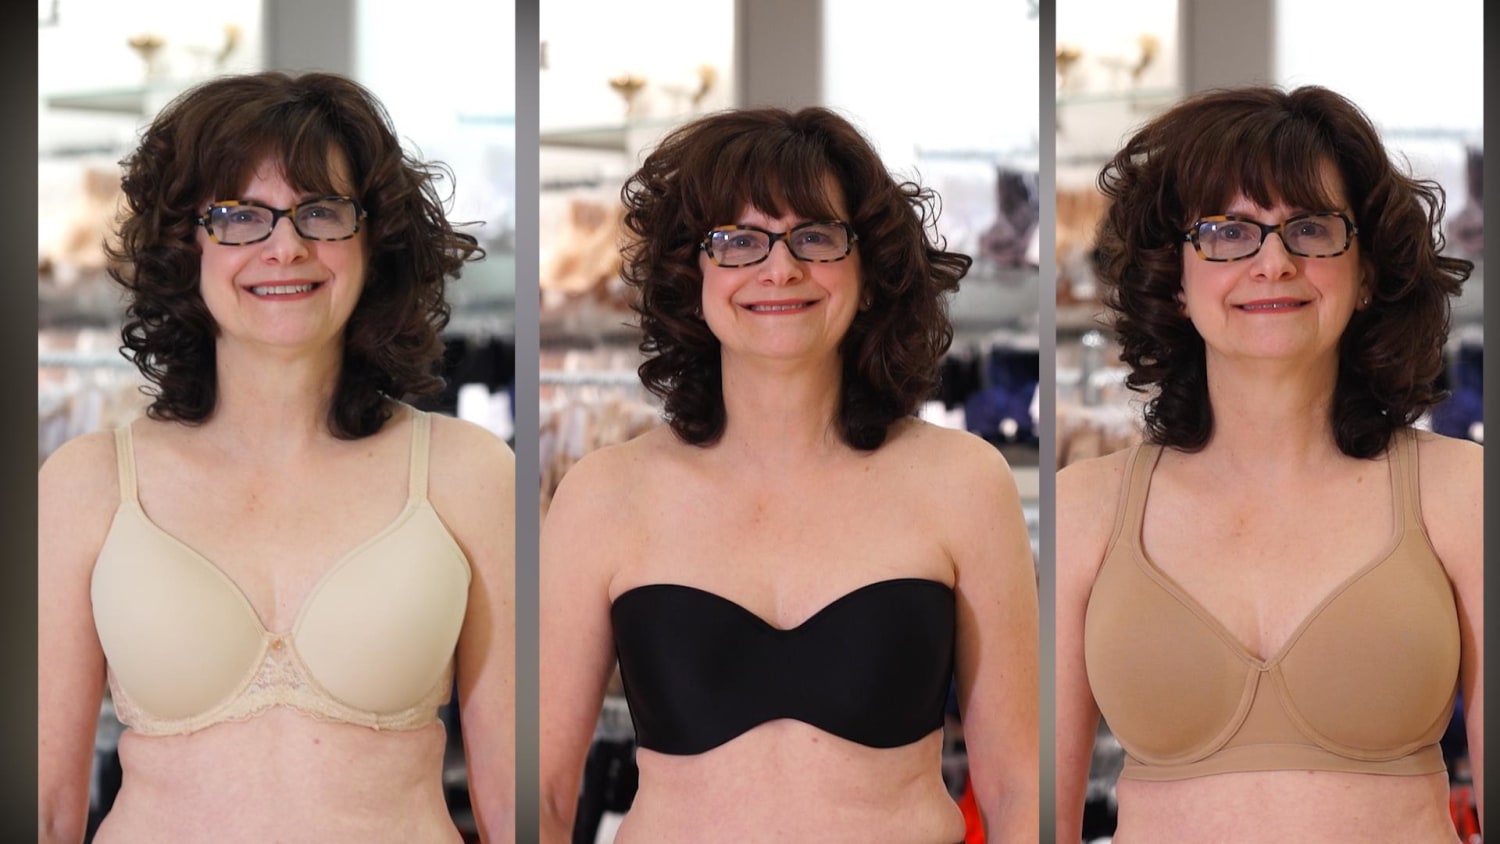 Bra fitter shares the 'best and worst' ways to put on a bra - 'you